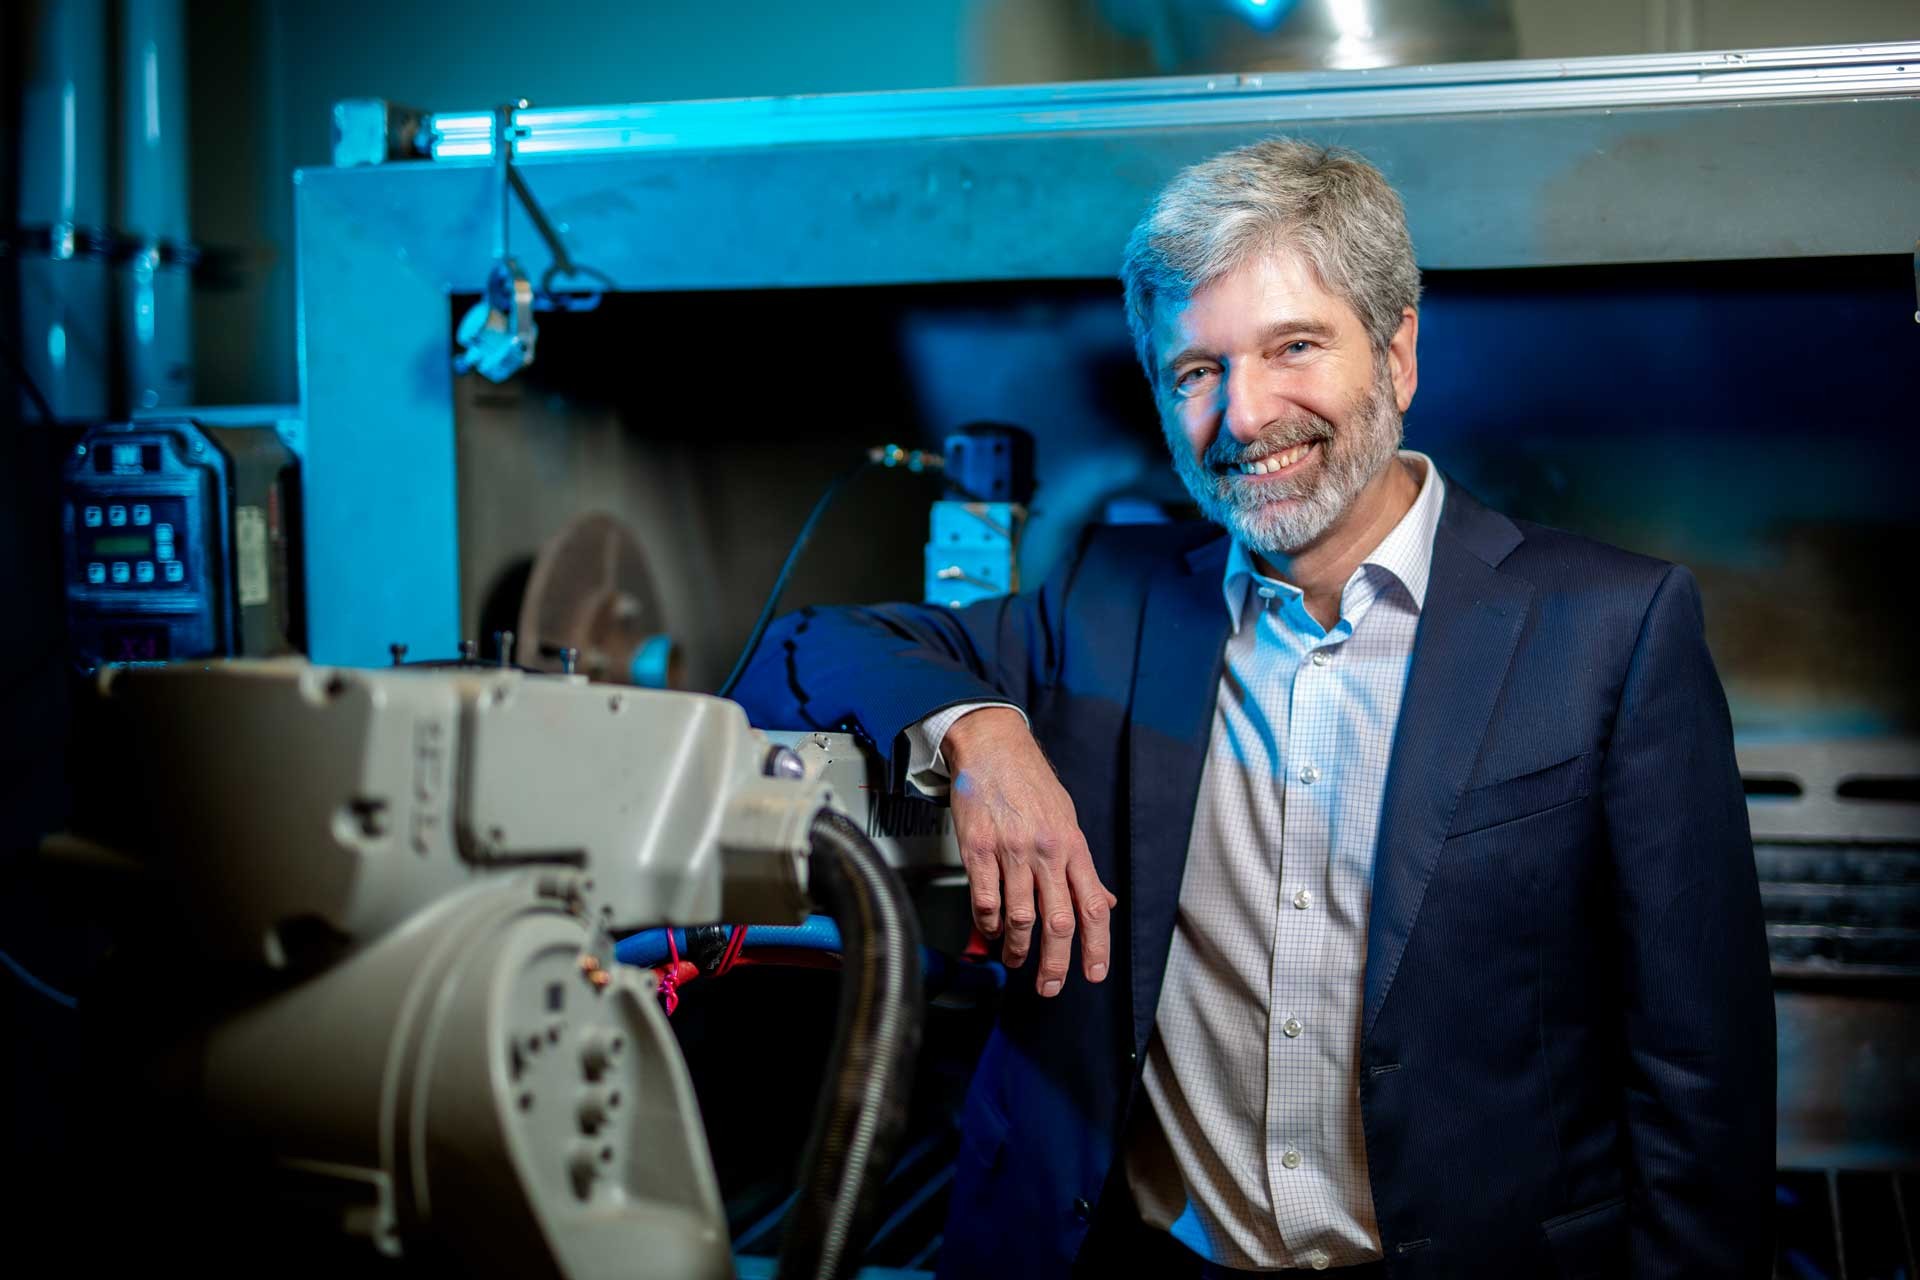 Pictured: A smiling man with short grey hair, a grey beard, in a shirt and jacket and standing next to a piece of machinery.